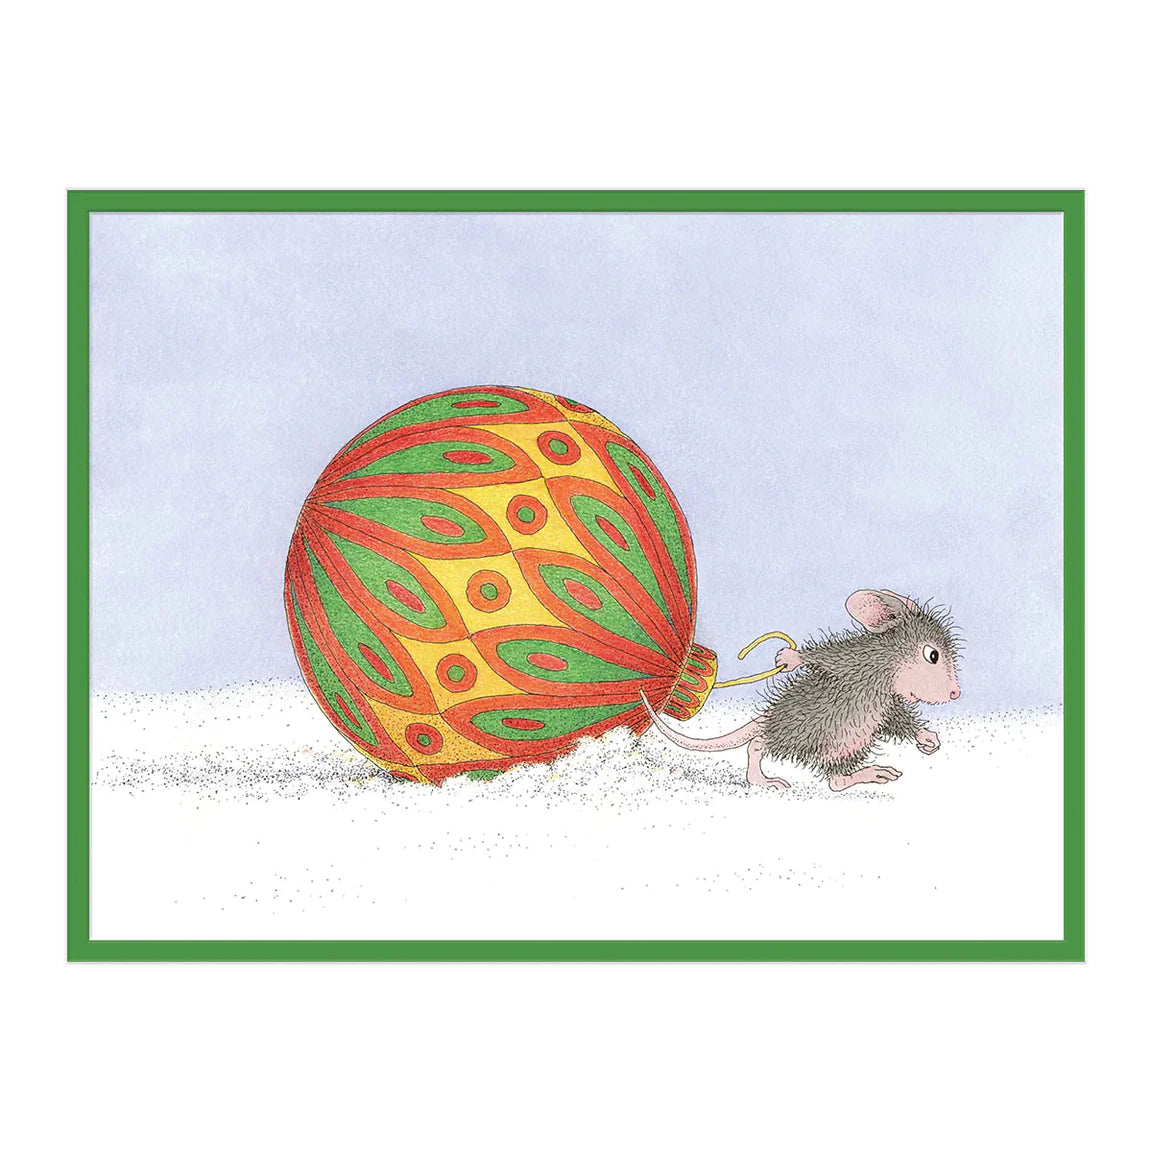 Spellbinders House Mouse Cling Rubber Stamp Briging Christmas To You - RSC-016